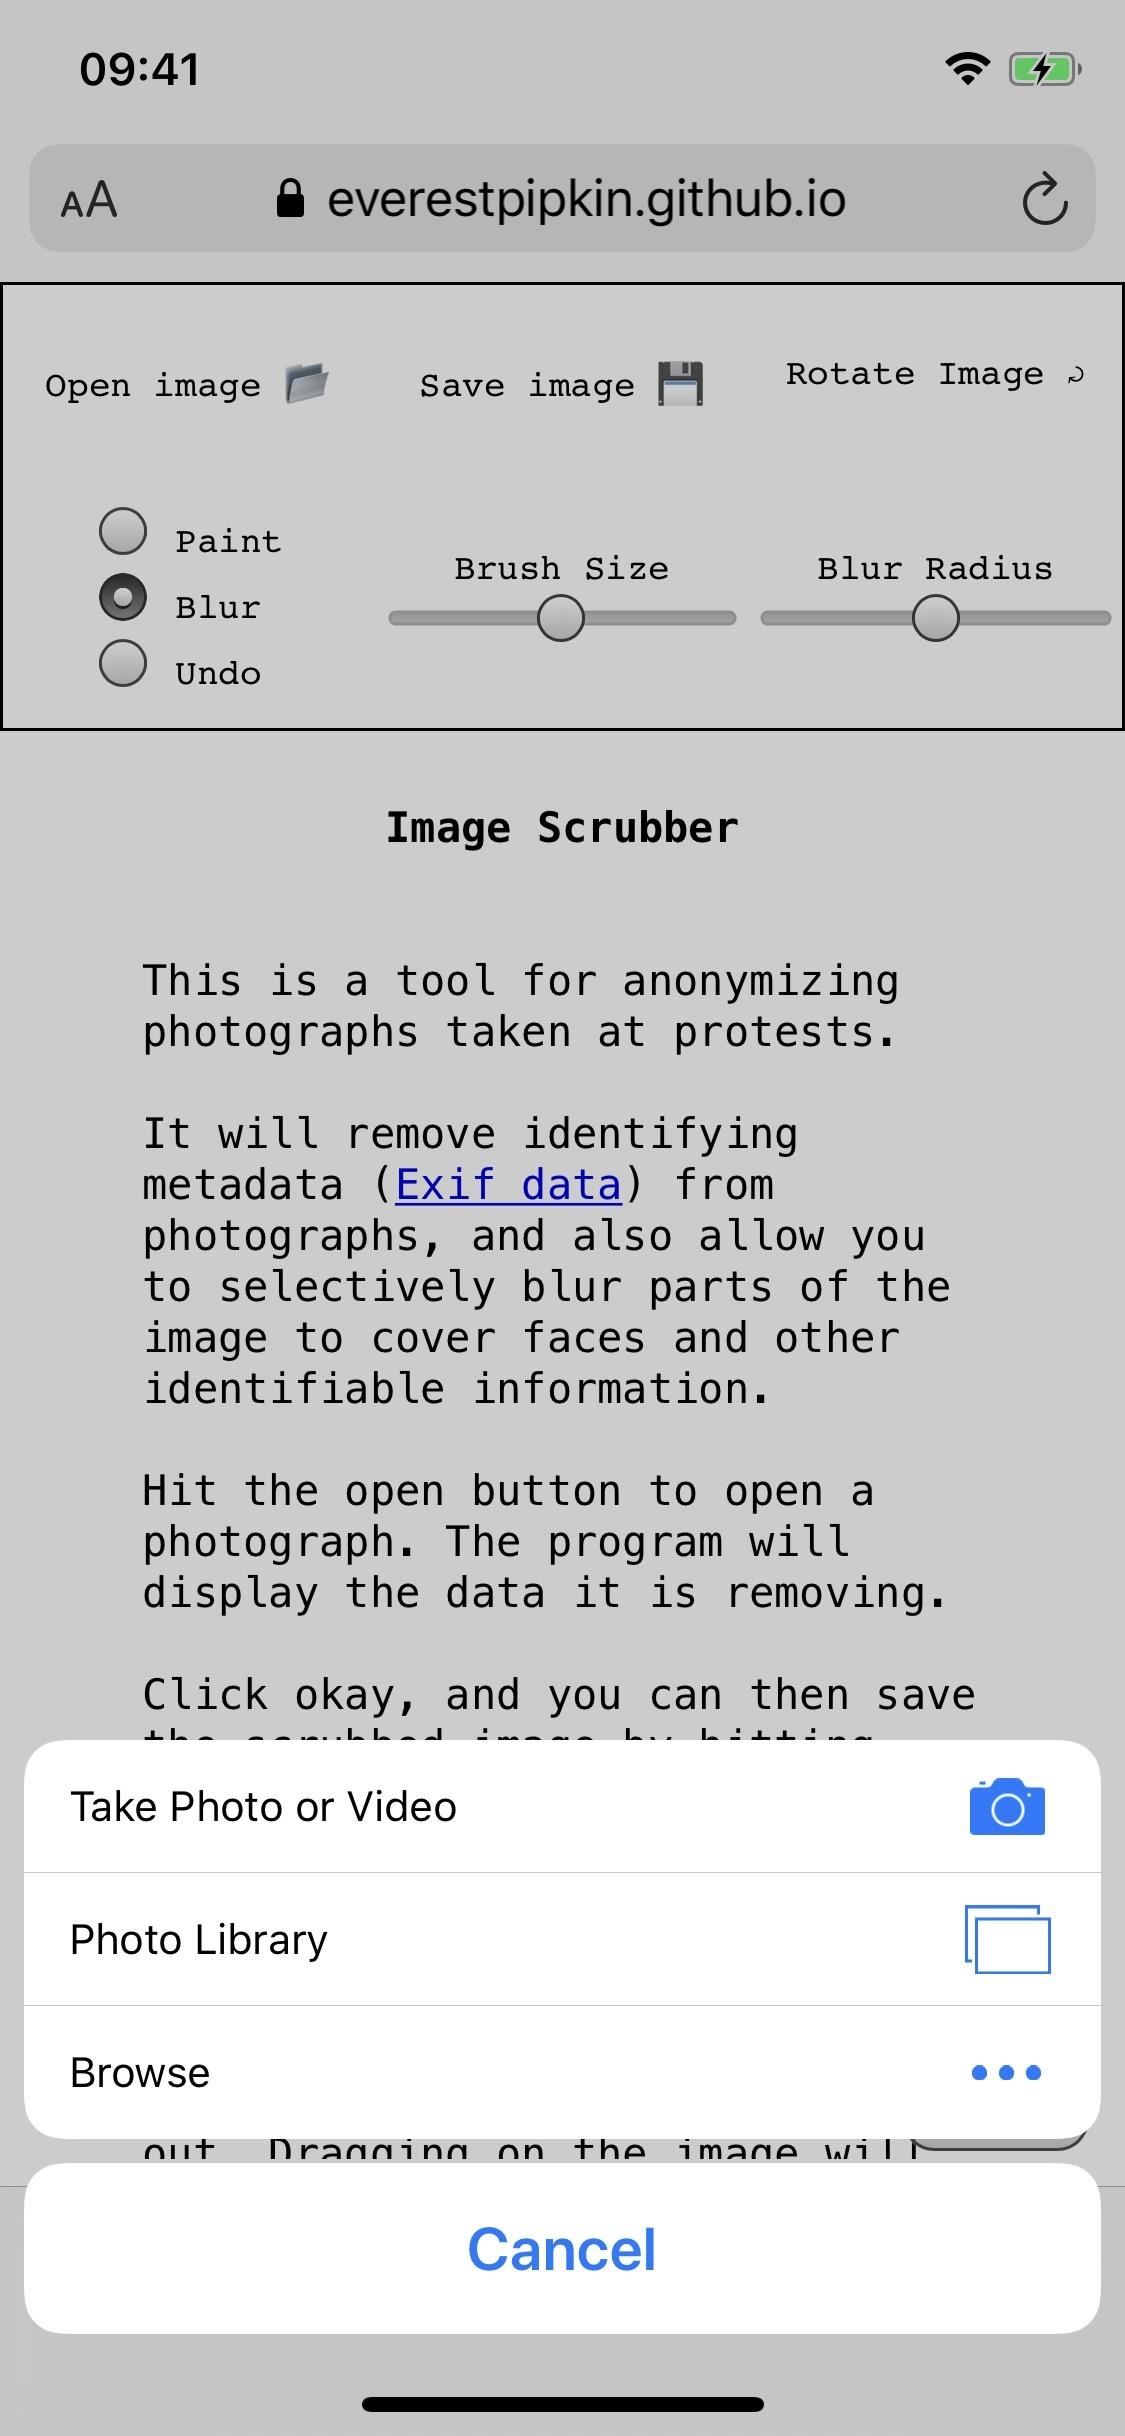 Wipe & Obfuscate Identifying Information in Your Protest Photos for More Anonymous Sharing